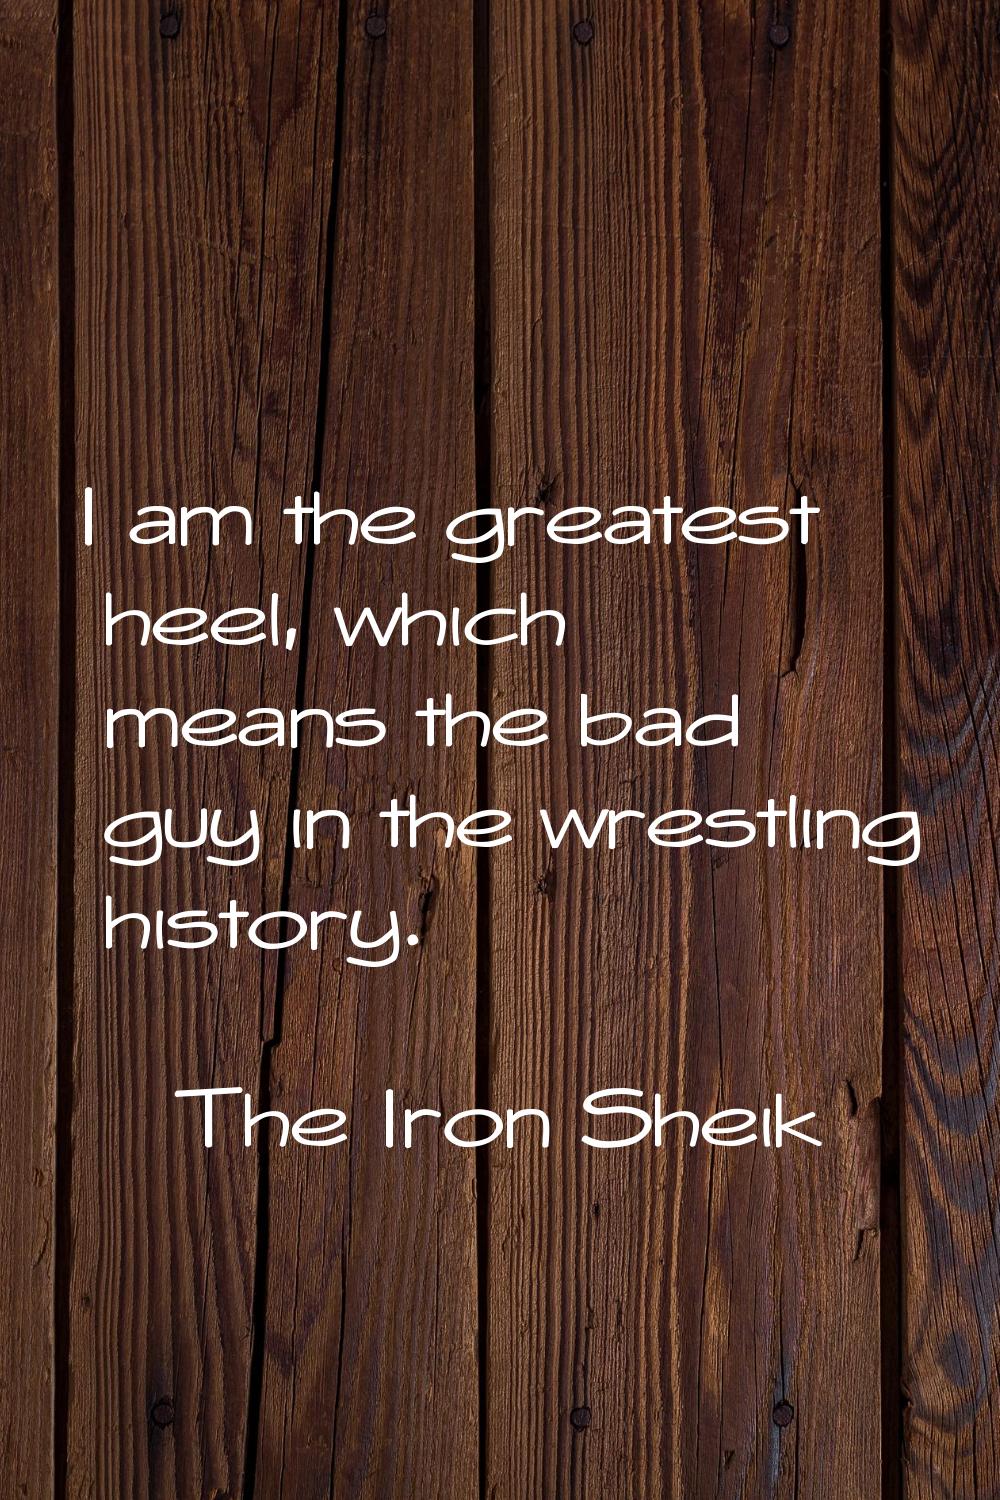 I am the greatest heel, which means the bad guy in the wrestling history.